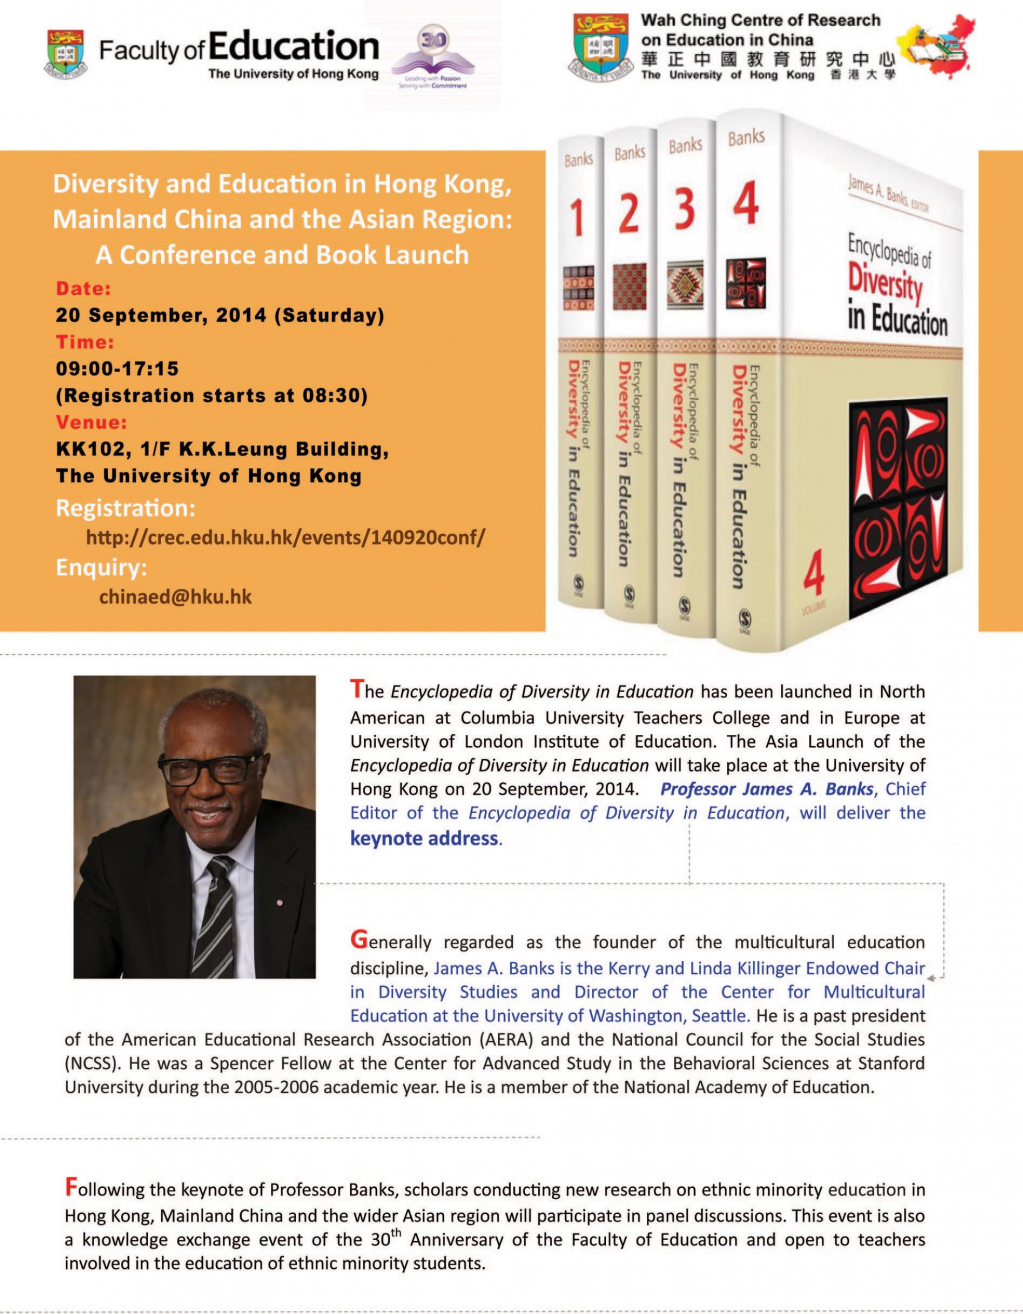 Diversity and Education in Hong Kong, Mainland China and the Asian Region: A Conference and Book Launch